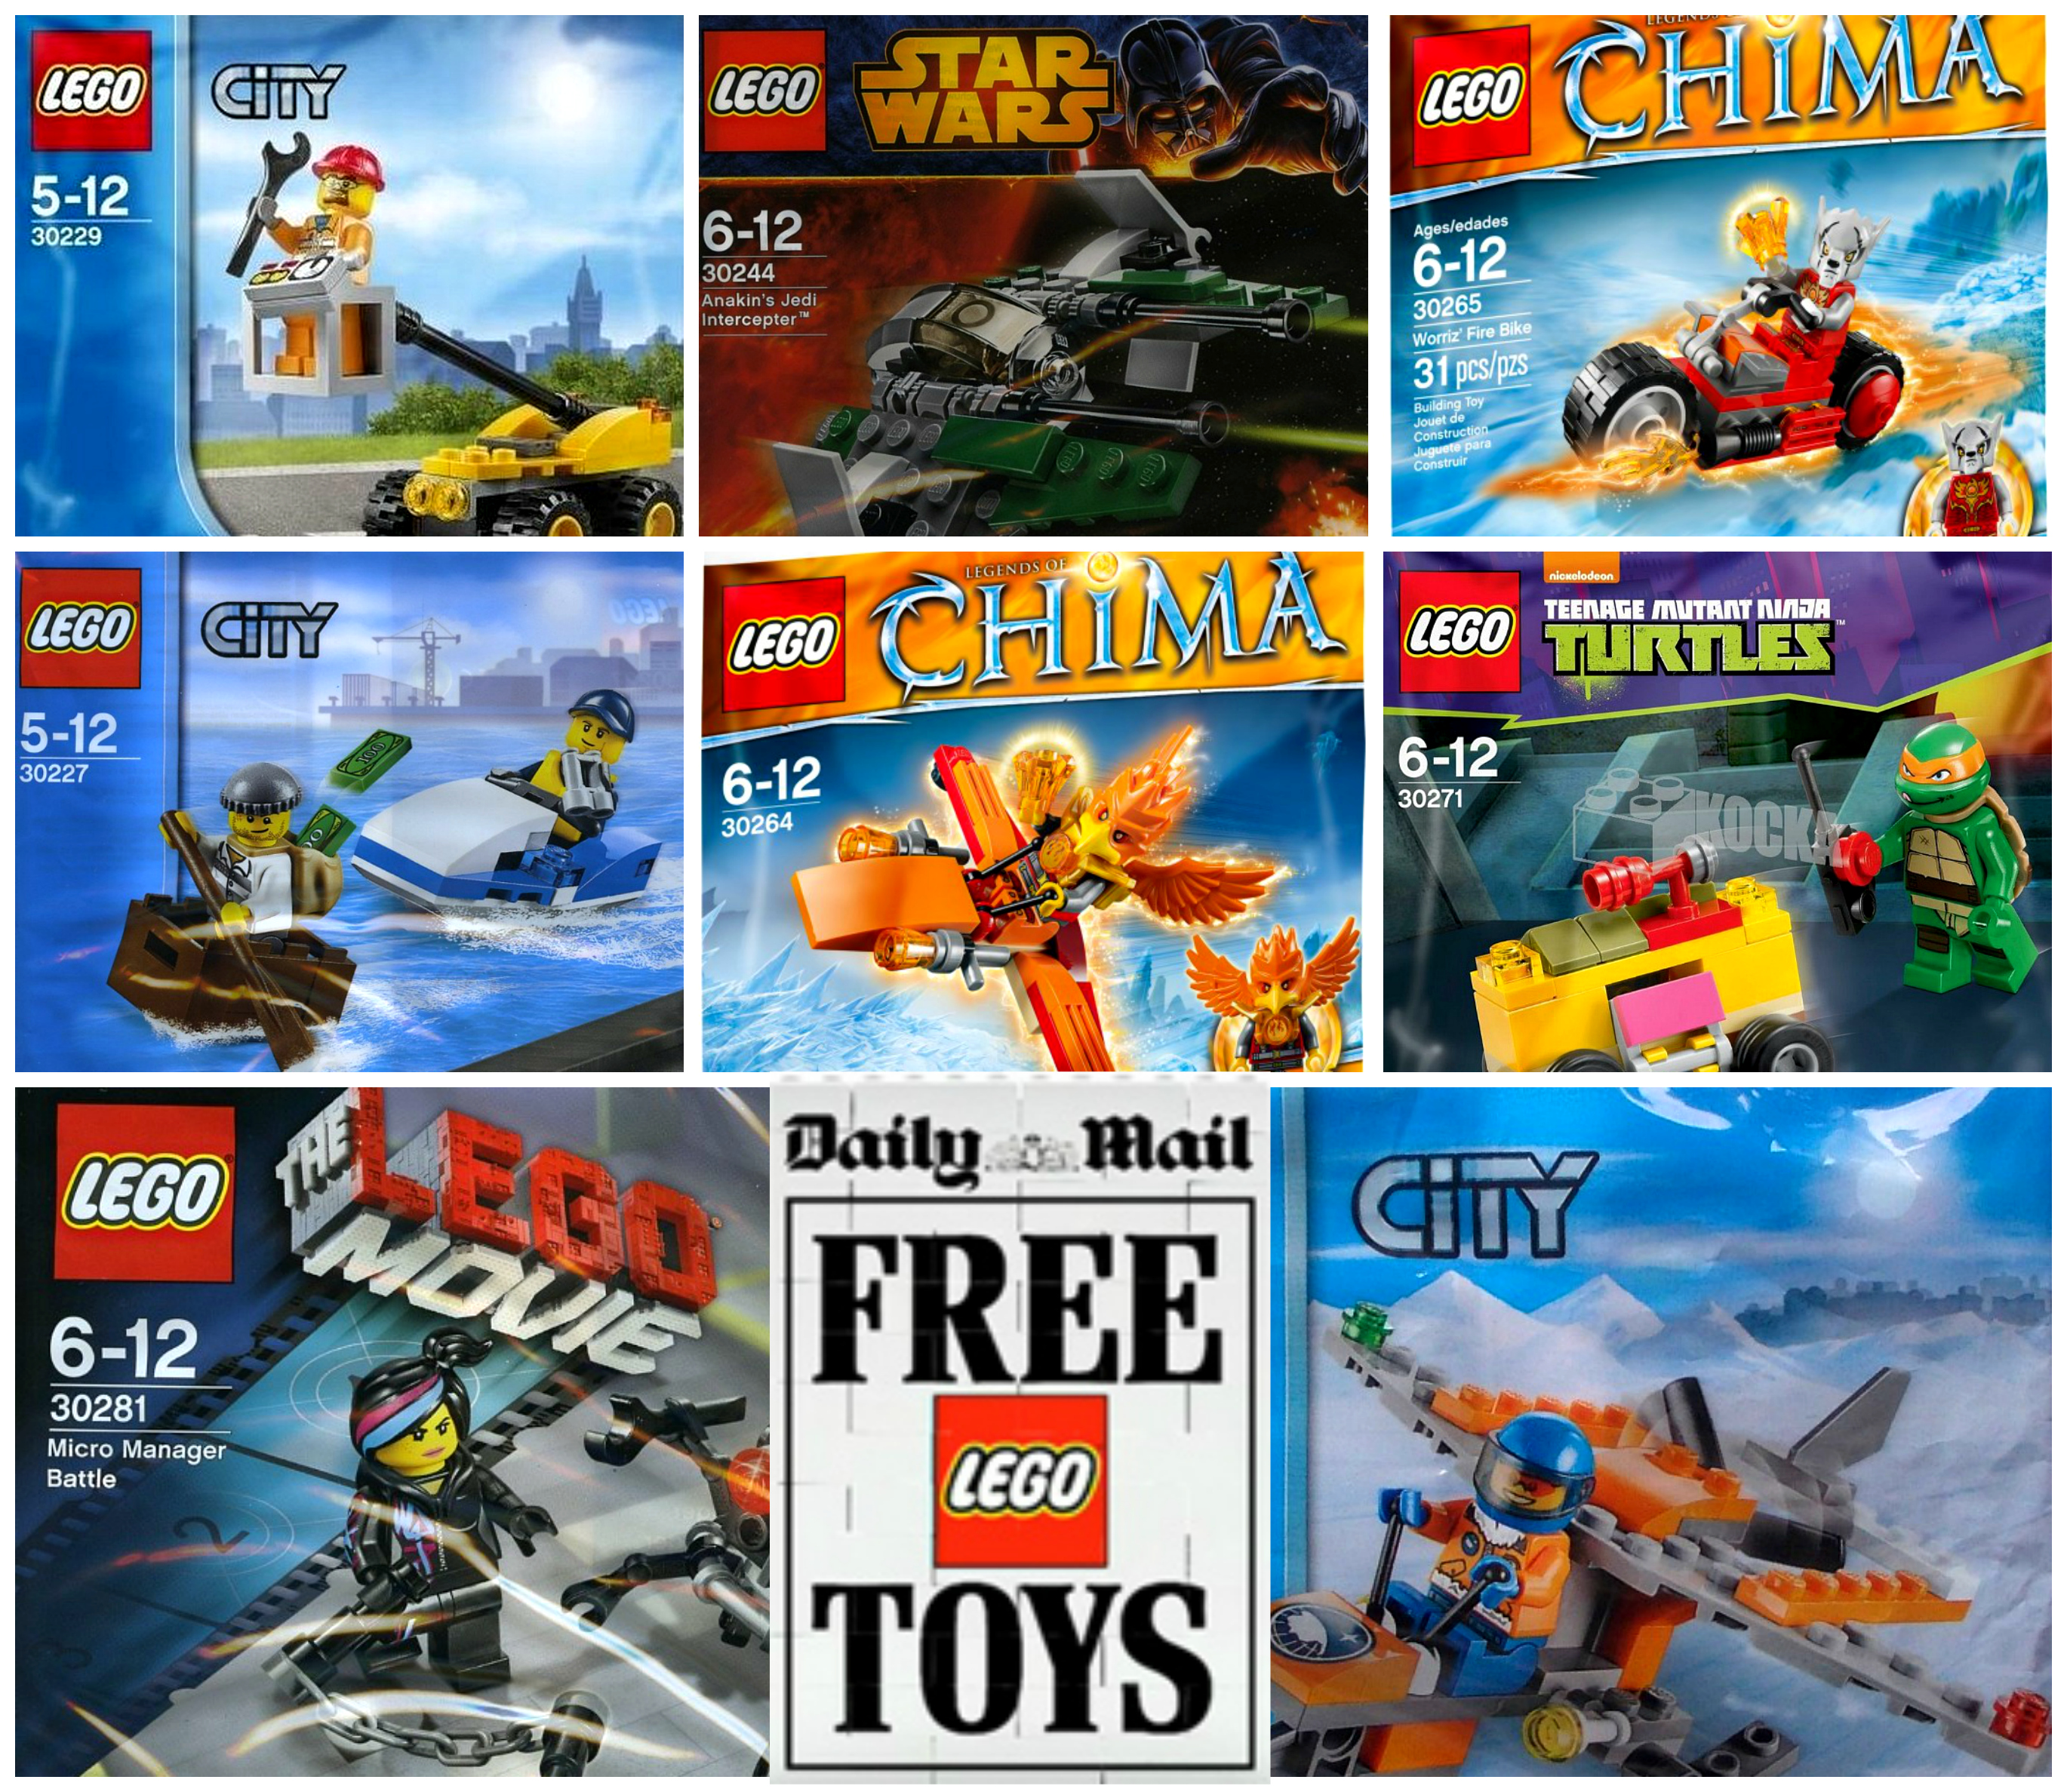 daily-mail-lego-september-2014-2